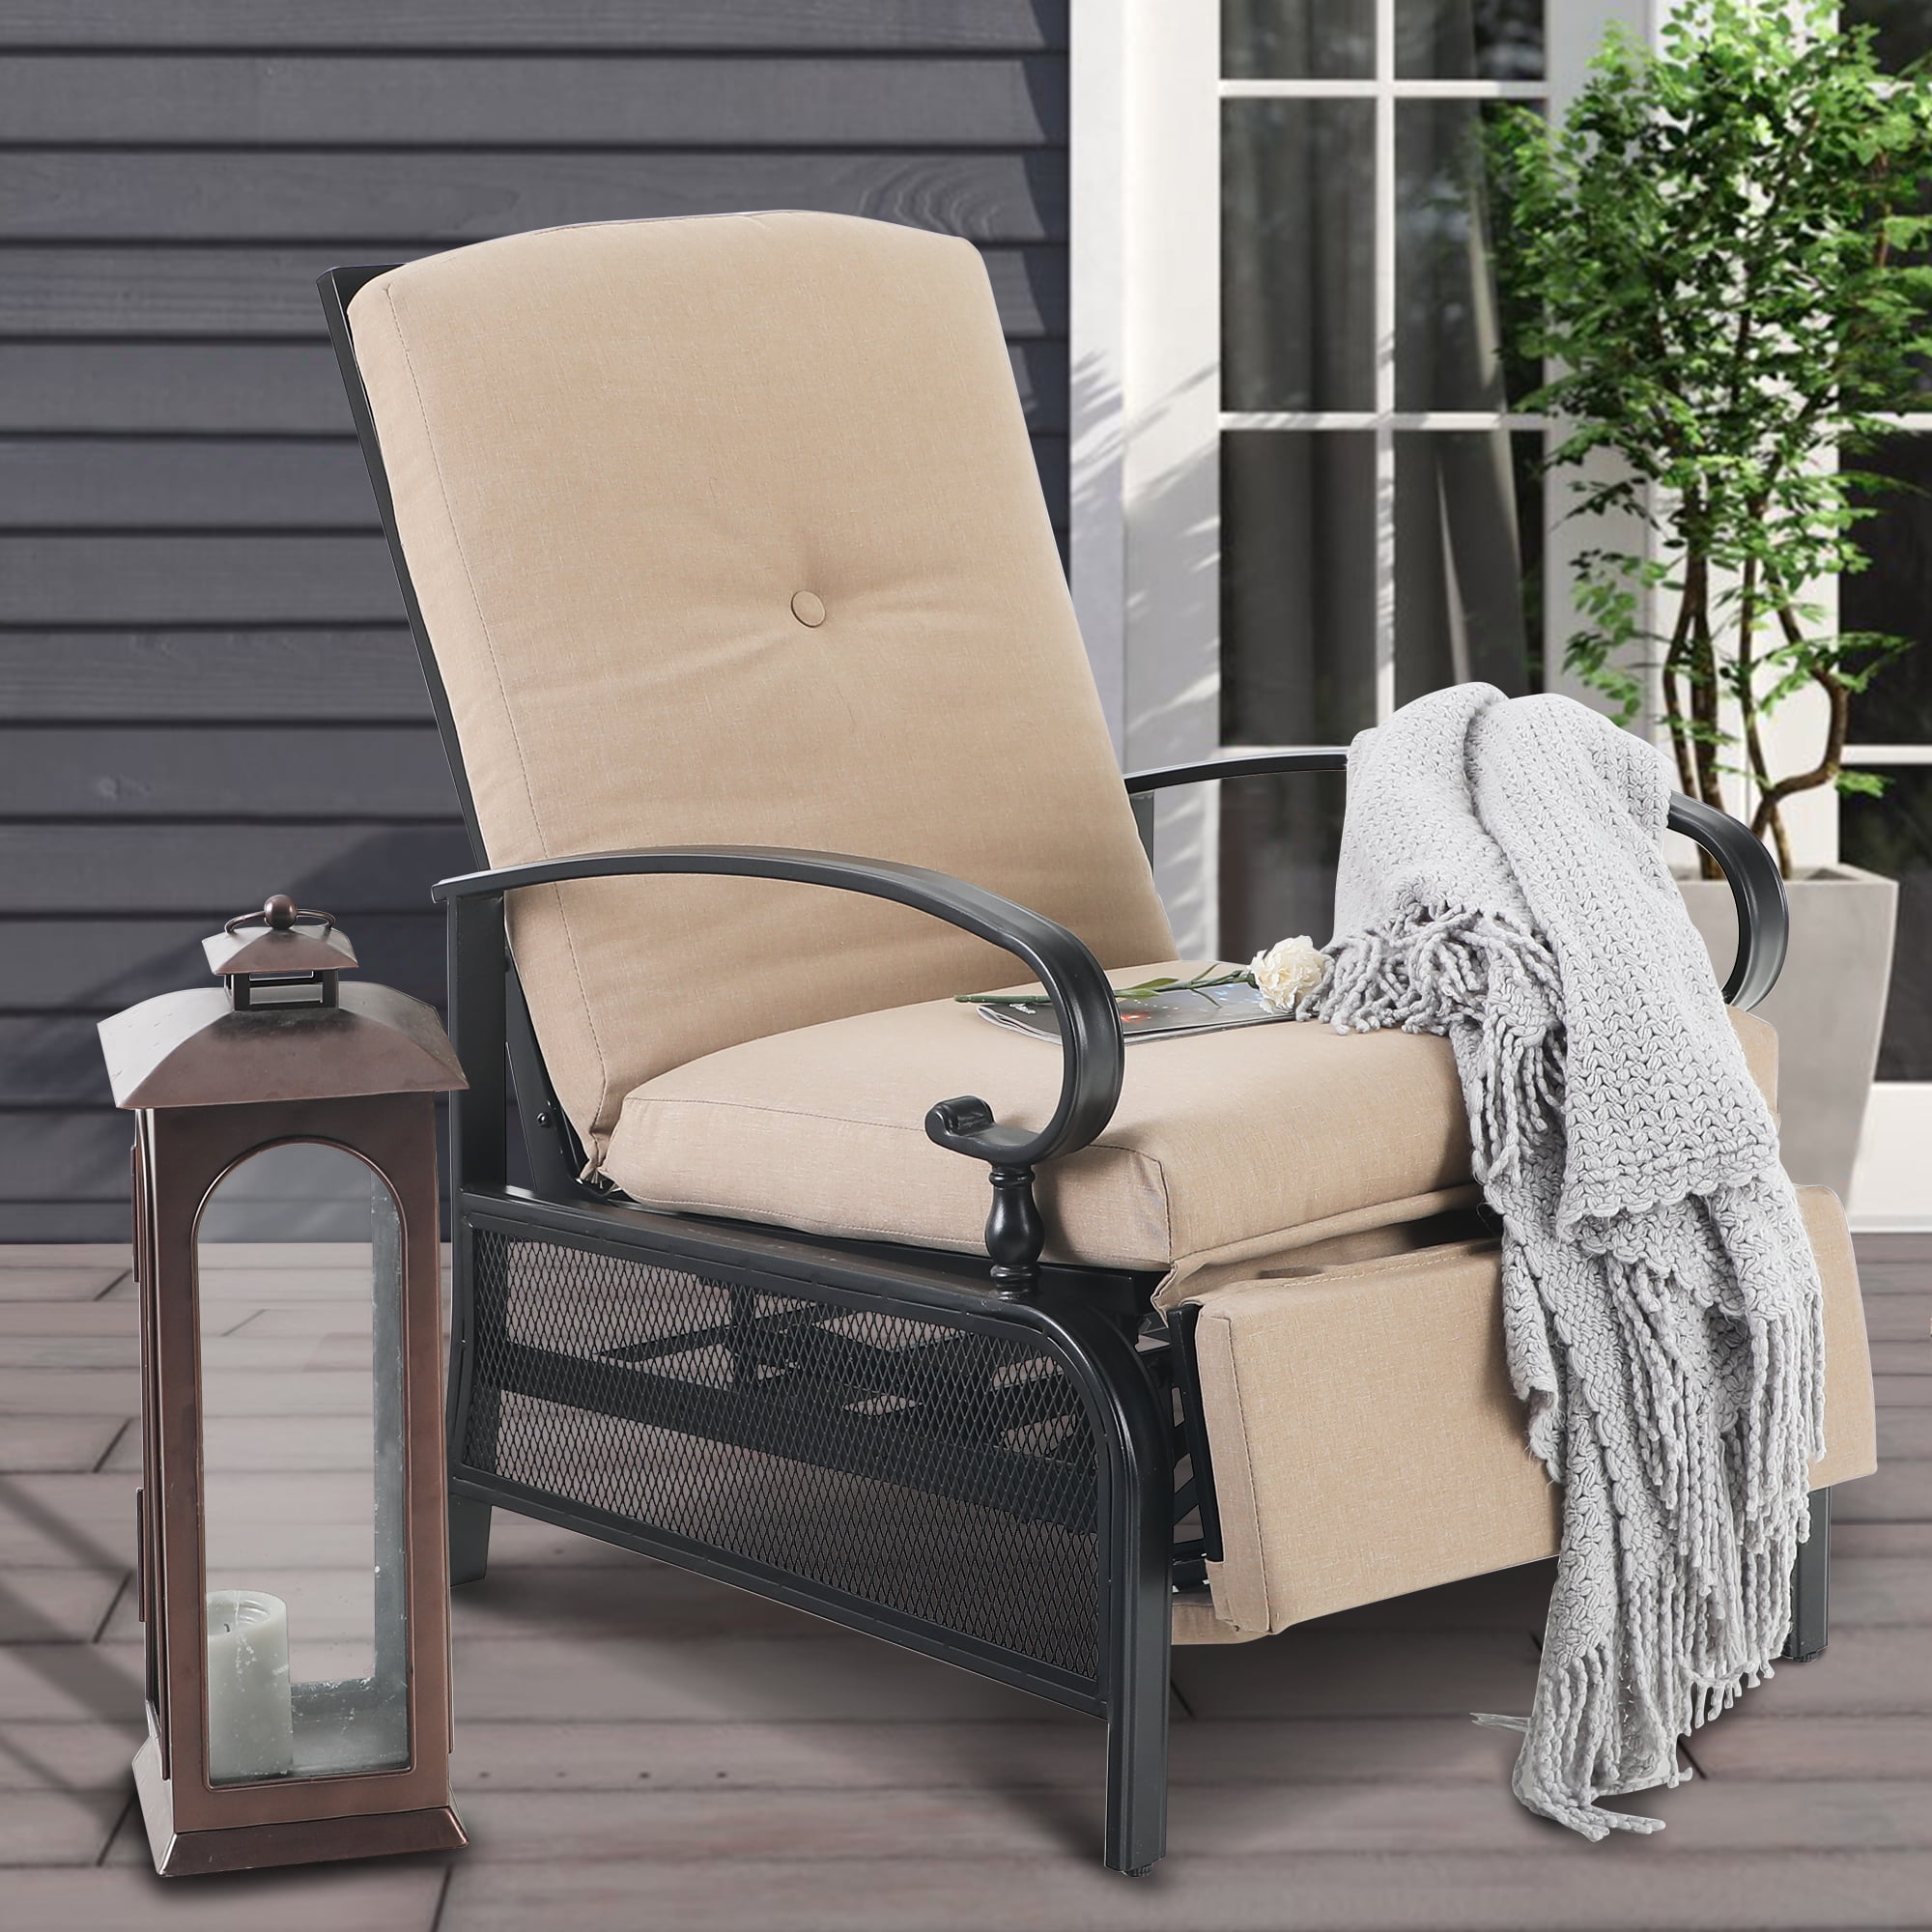 Details about   Sun Lounger Cushion Padding In/Outdoor Patio Recliner Lounge Pad Chair Sofa Mat 